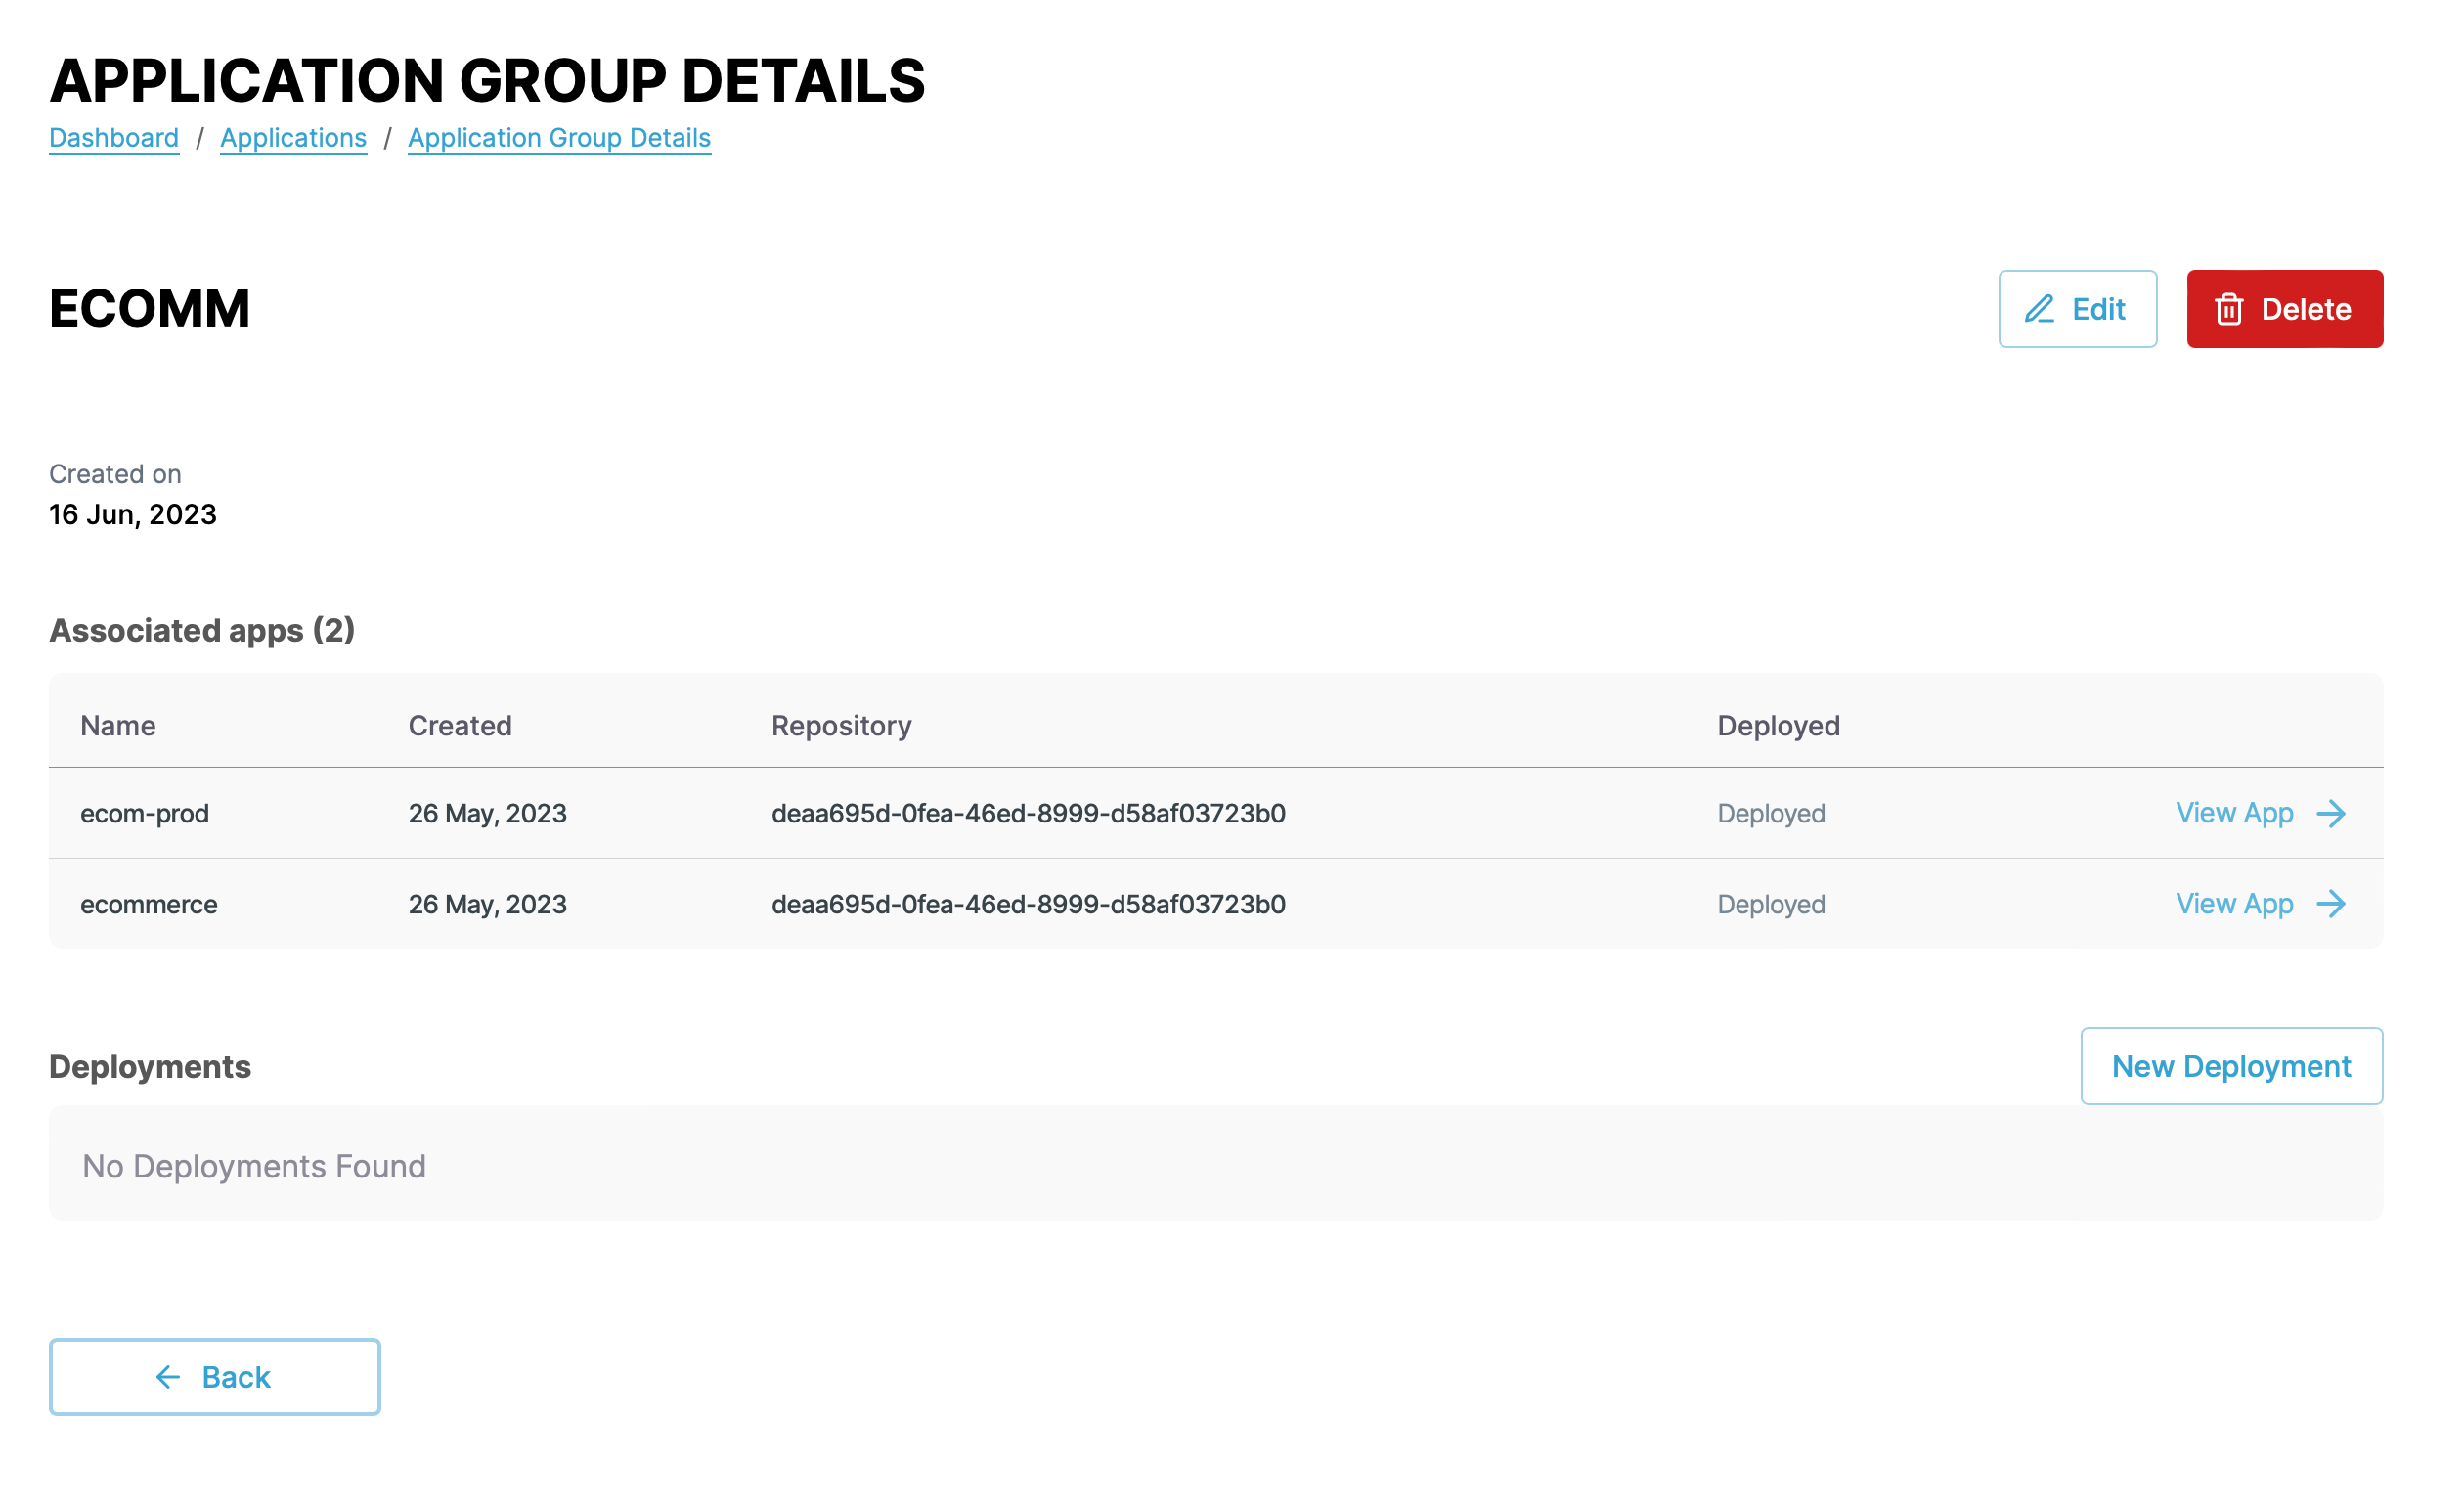 Screenshot of application group details page